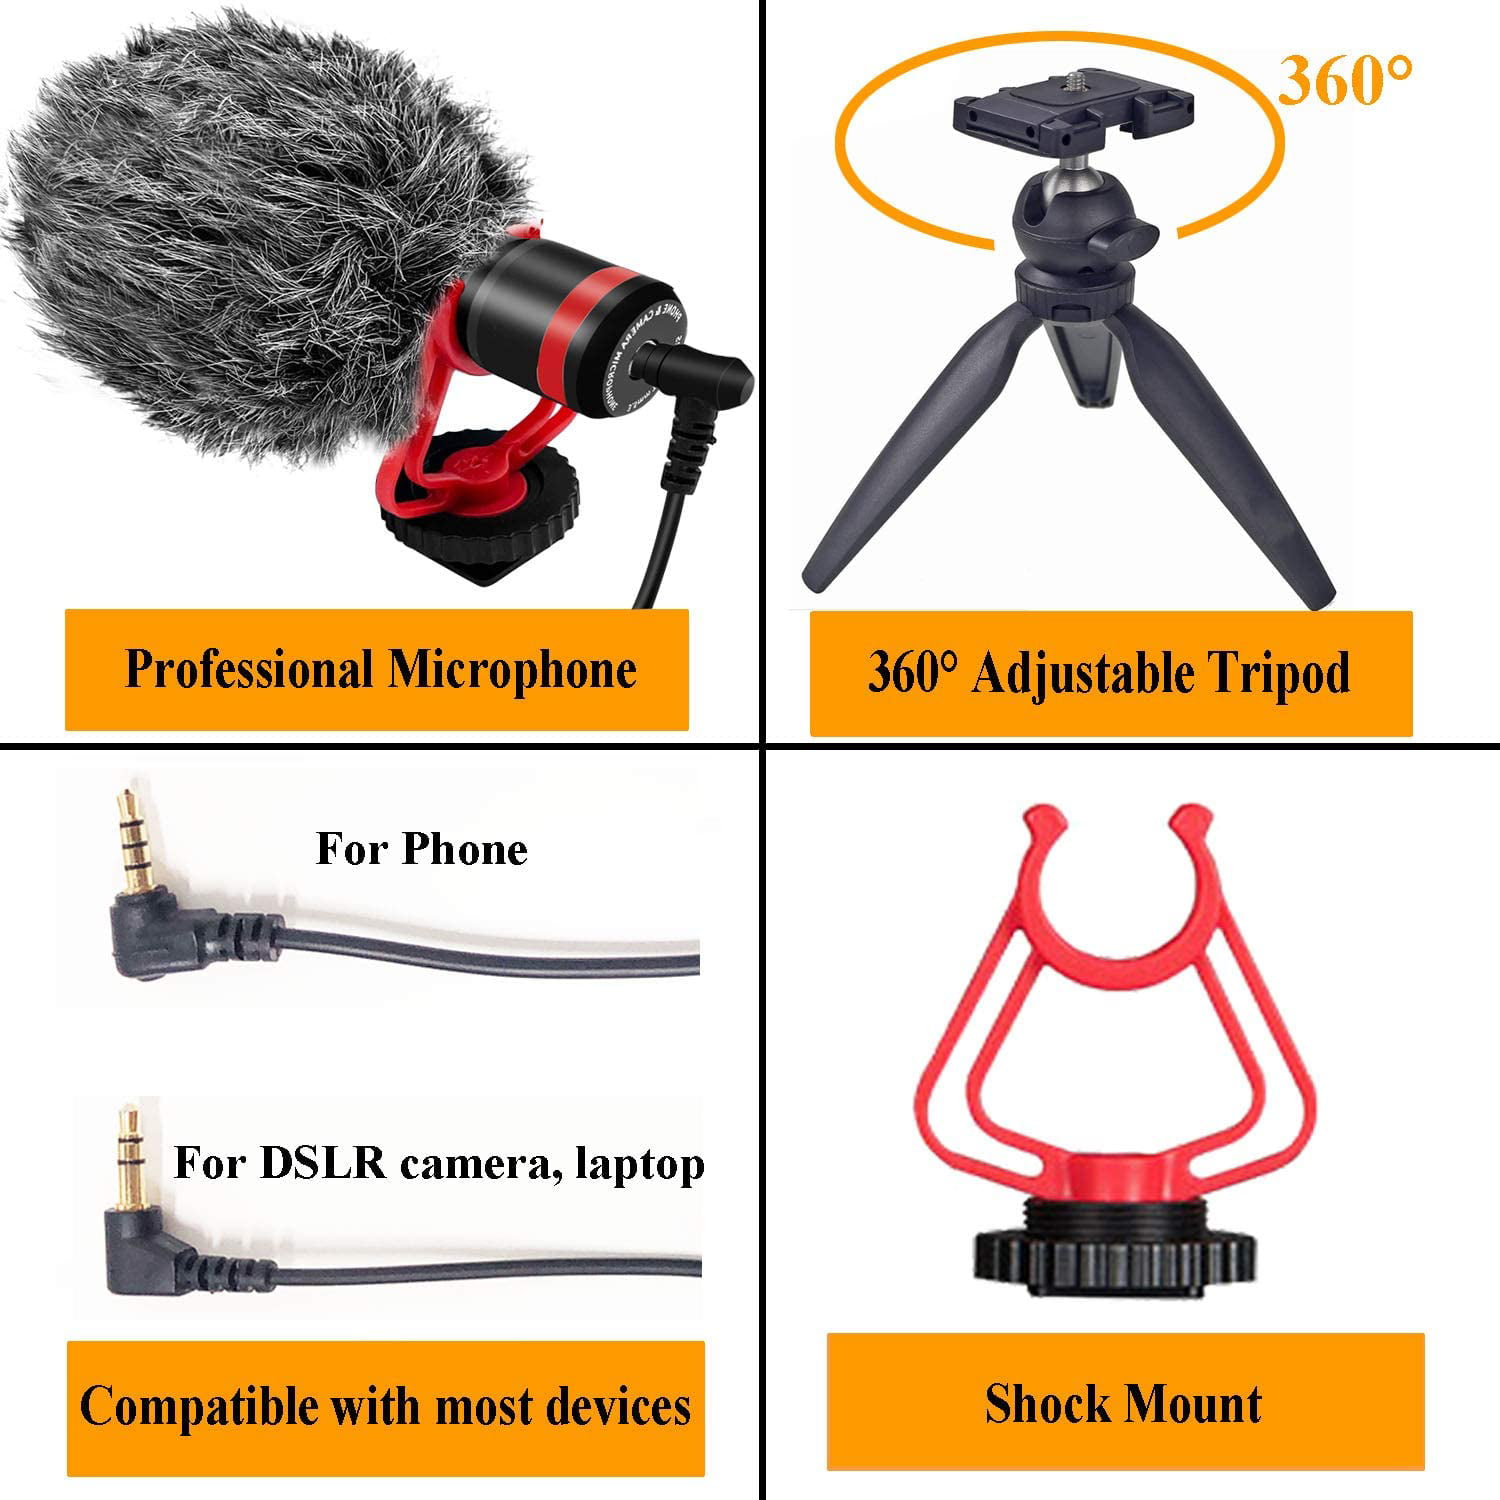 Tikysky Camera Microphone M-3,External Video Microphone for Phone iPhone Camera with Shock Mount Windproof Windscreen,DSLR Mic for Canon Nikon Sony Panasonic Fuji Interview 